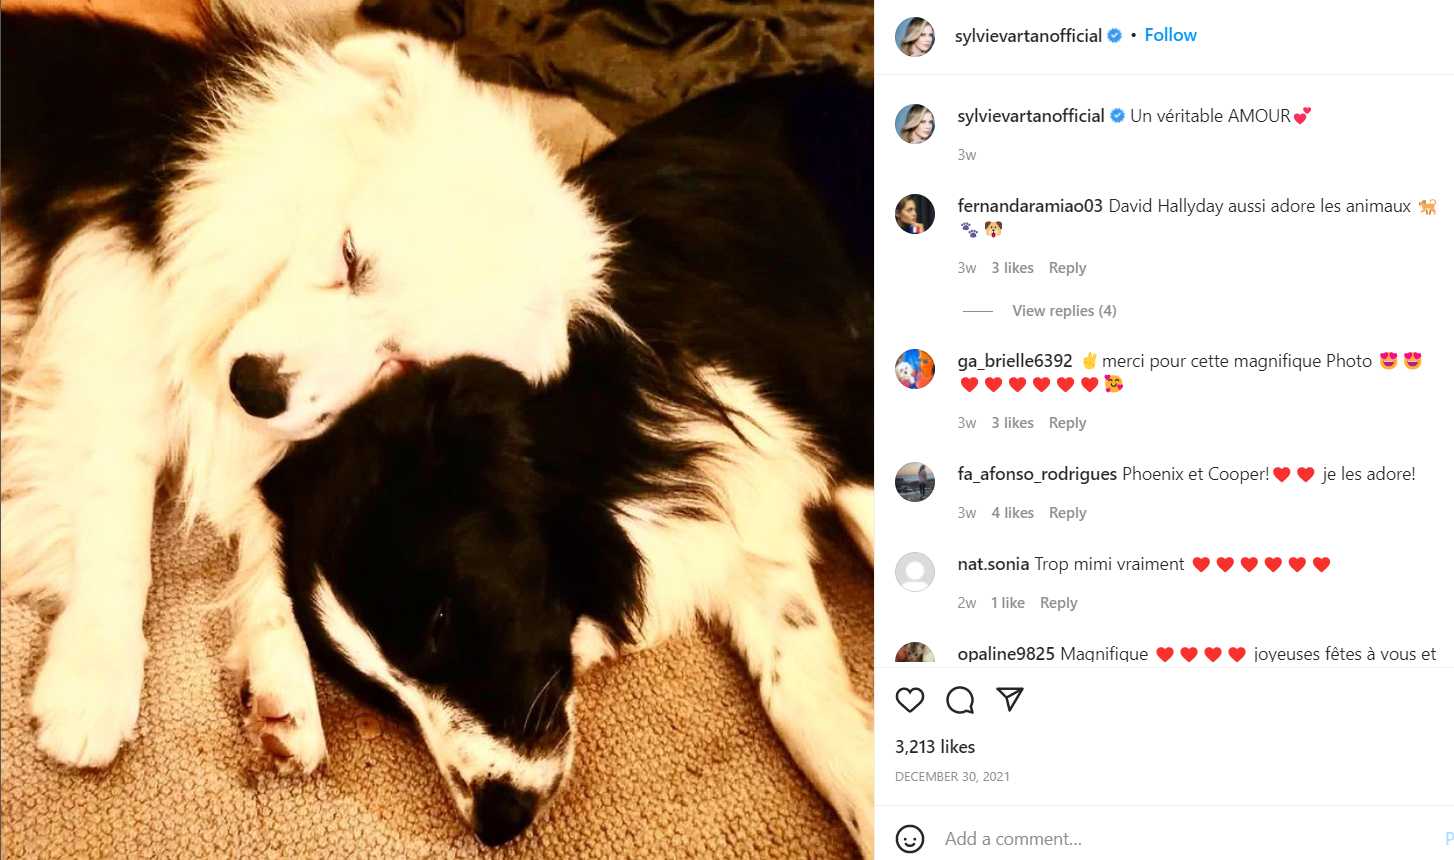 Sylvie Vartan posted about her dogs